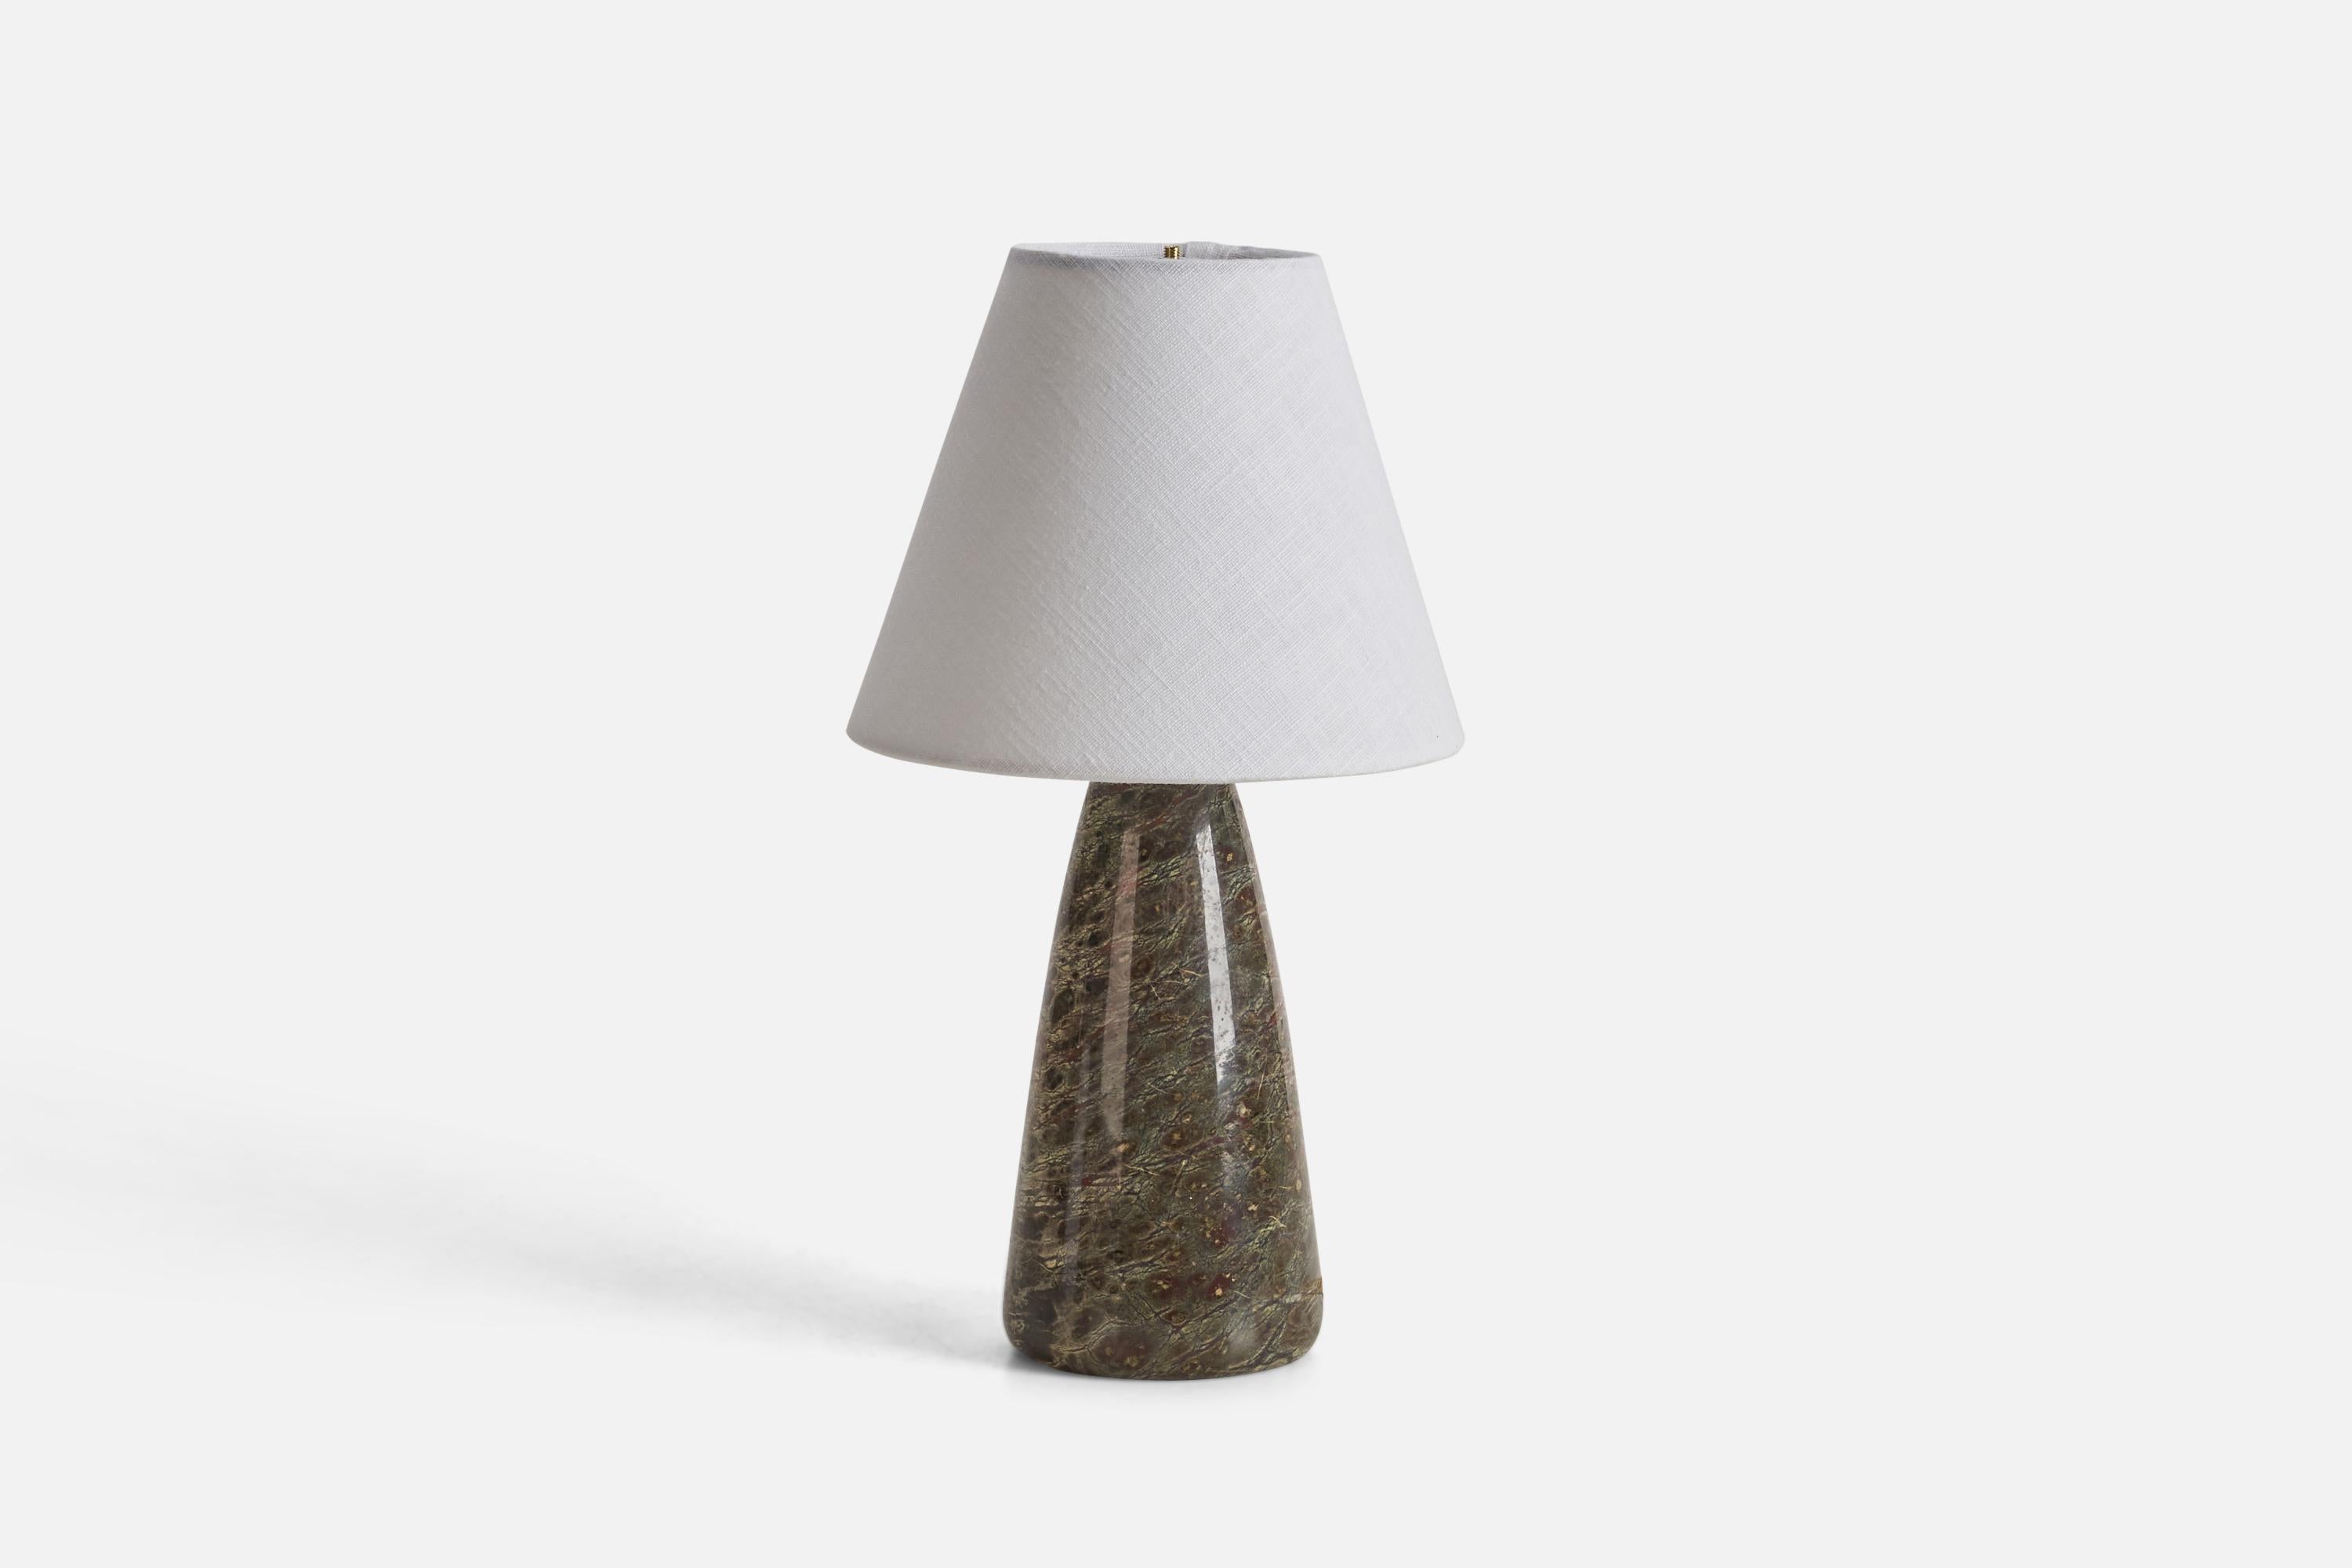 A polished stone table lamp designed and produced by a Swedish Designer, Sweden, 1970s.

Dimensions of Lamp (inches) : 10.68 x 4.2 x 4.2 (Height x Width x Depth)
Dimensions of Lampshade (inches) : 4 x 8 x 6.5 (Top Diameter x Bottom Diameter x